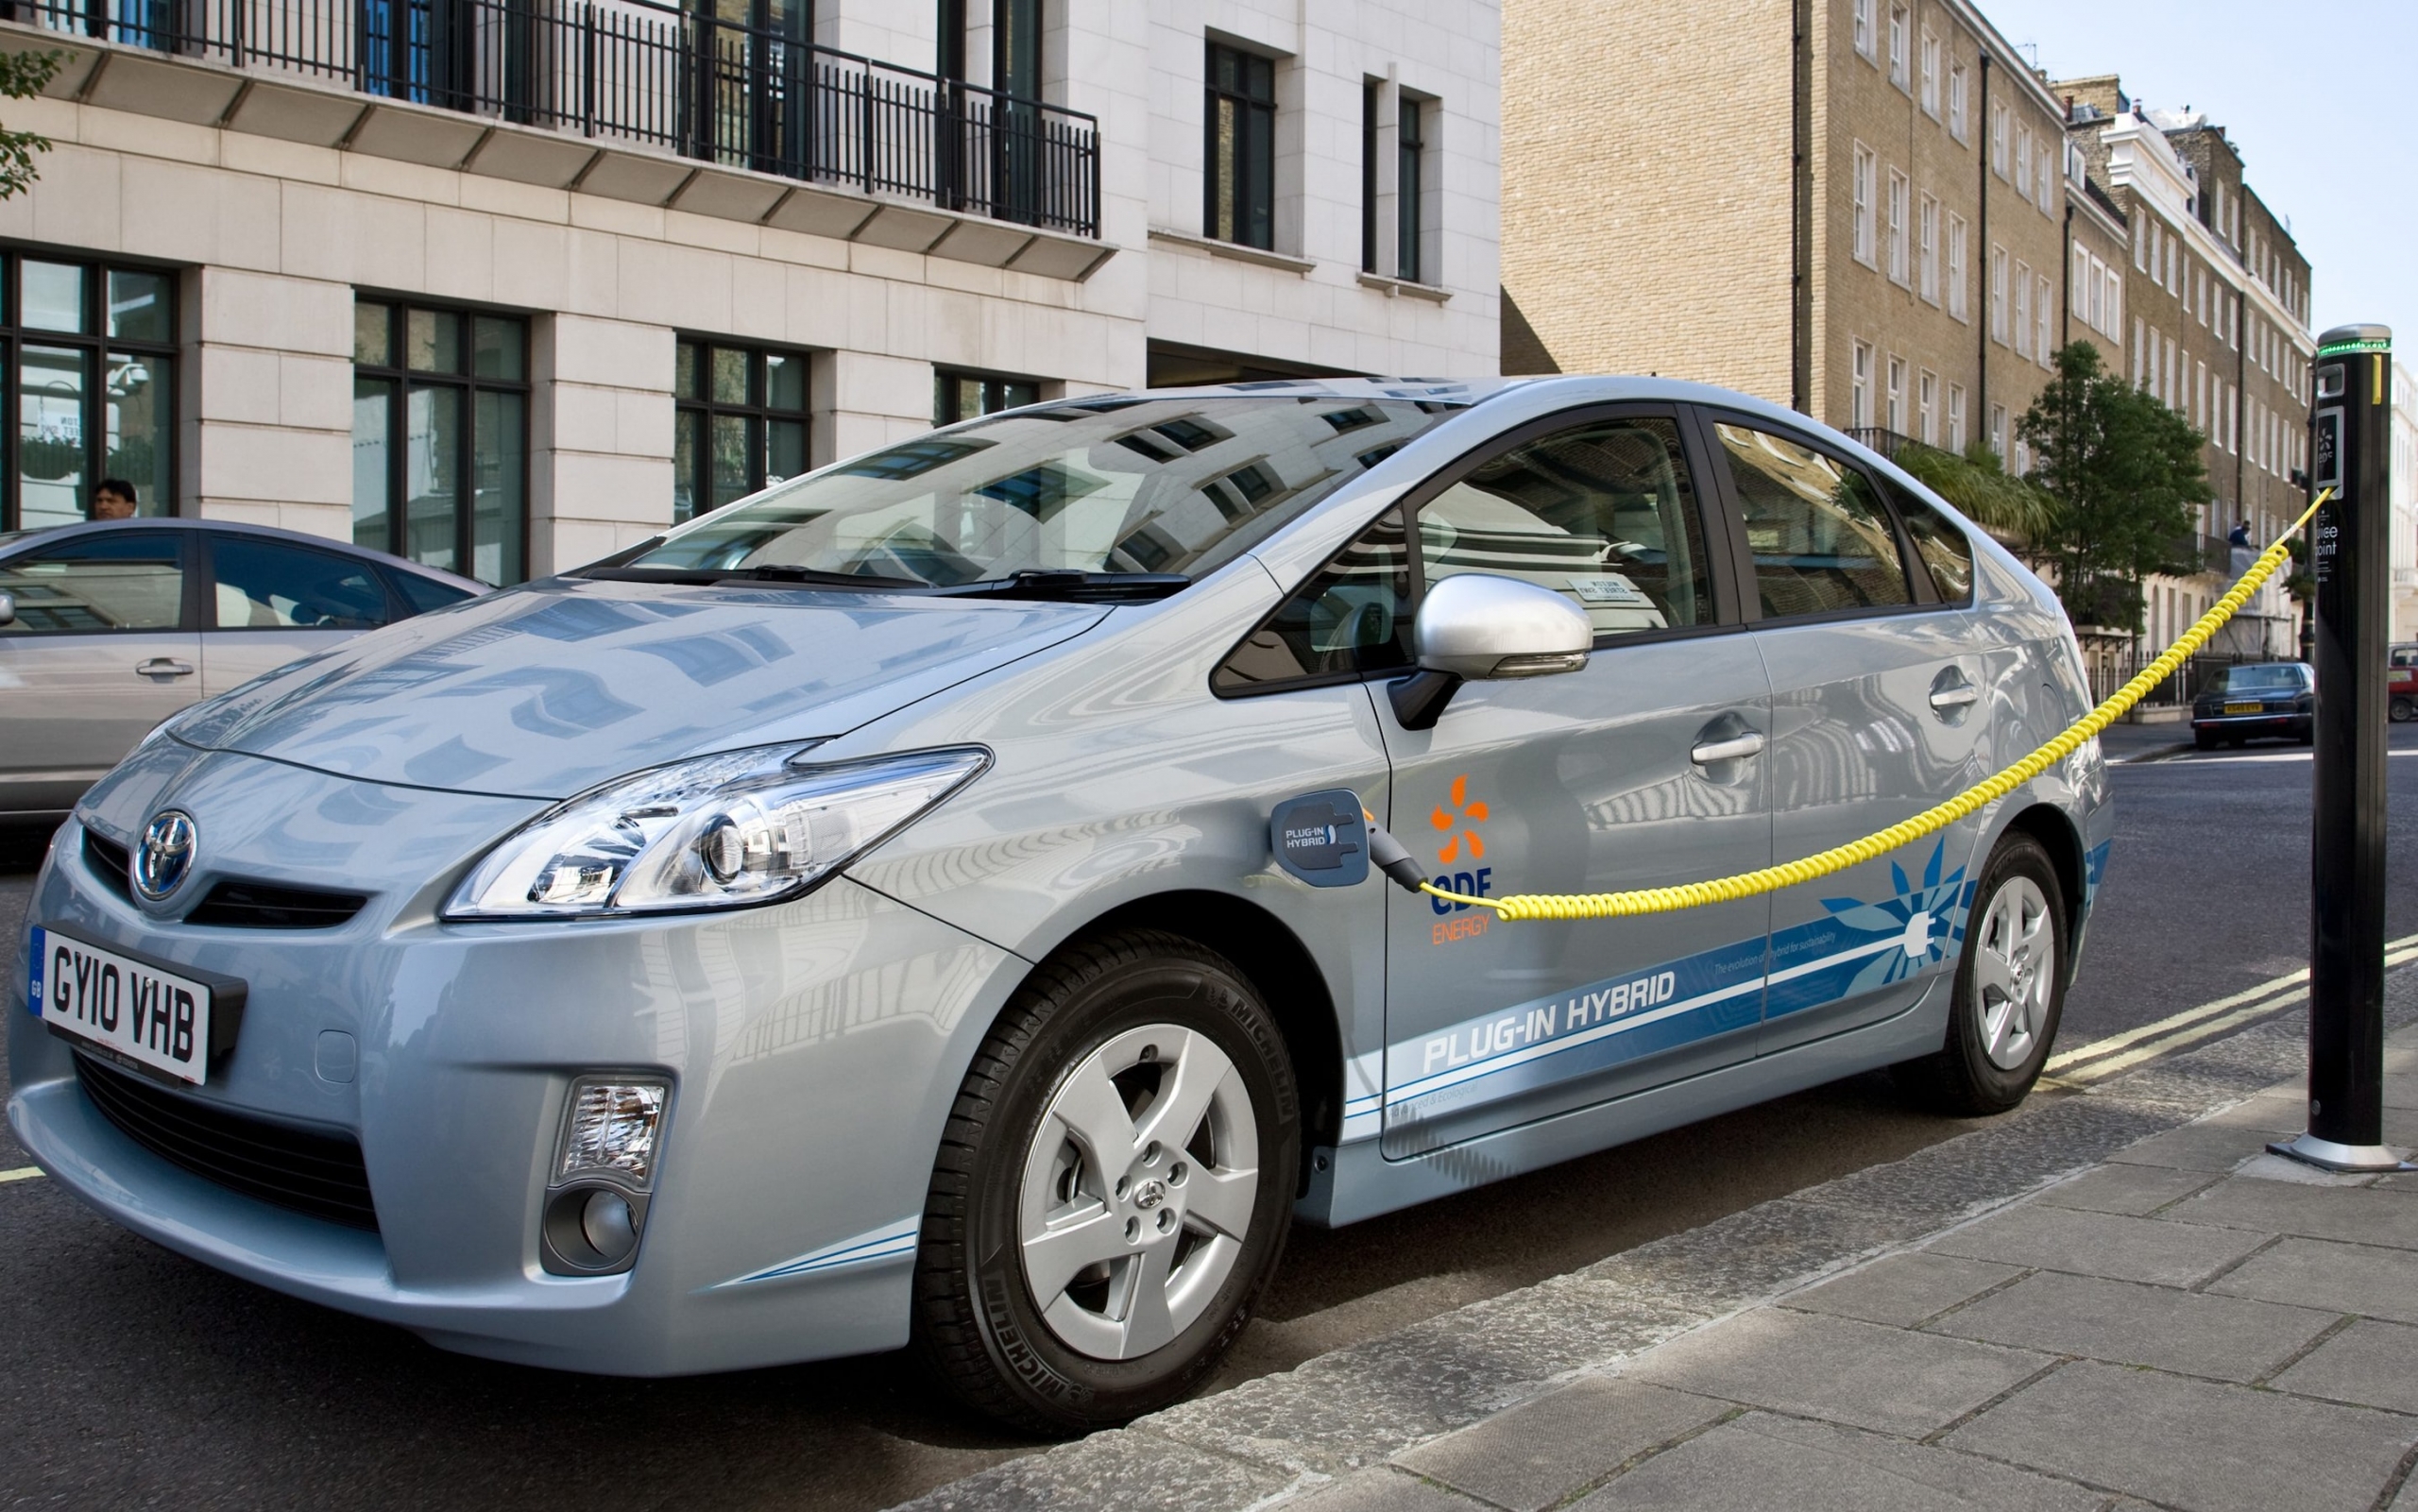 Hybrid Cars- Everything You Need To Know About This!